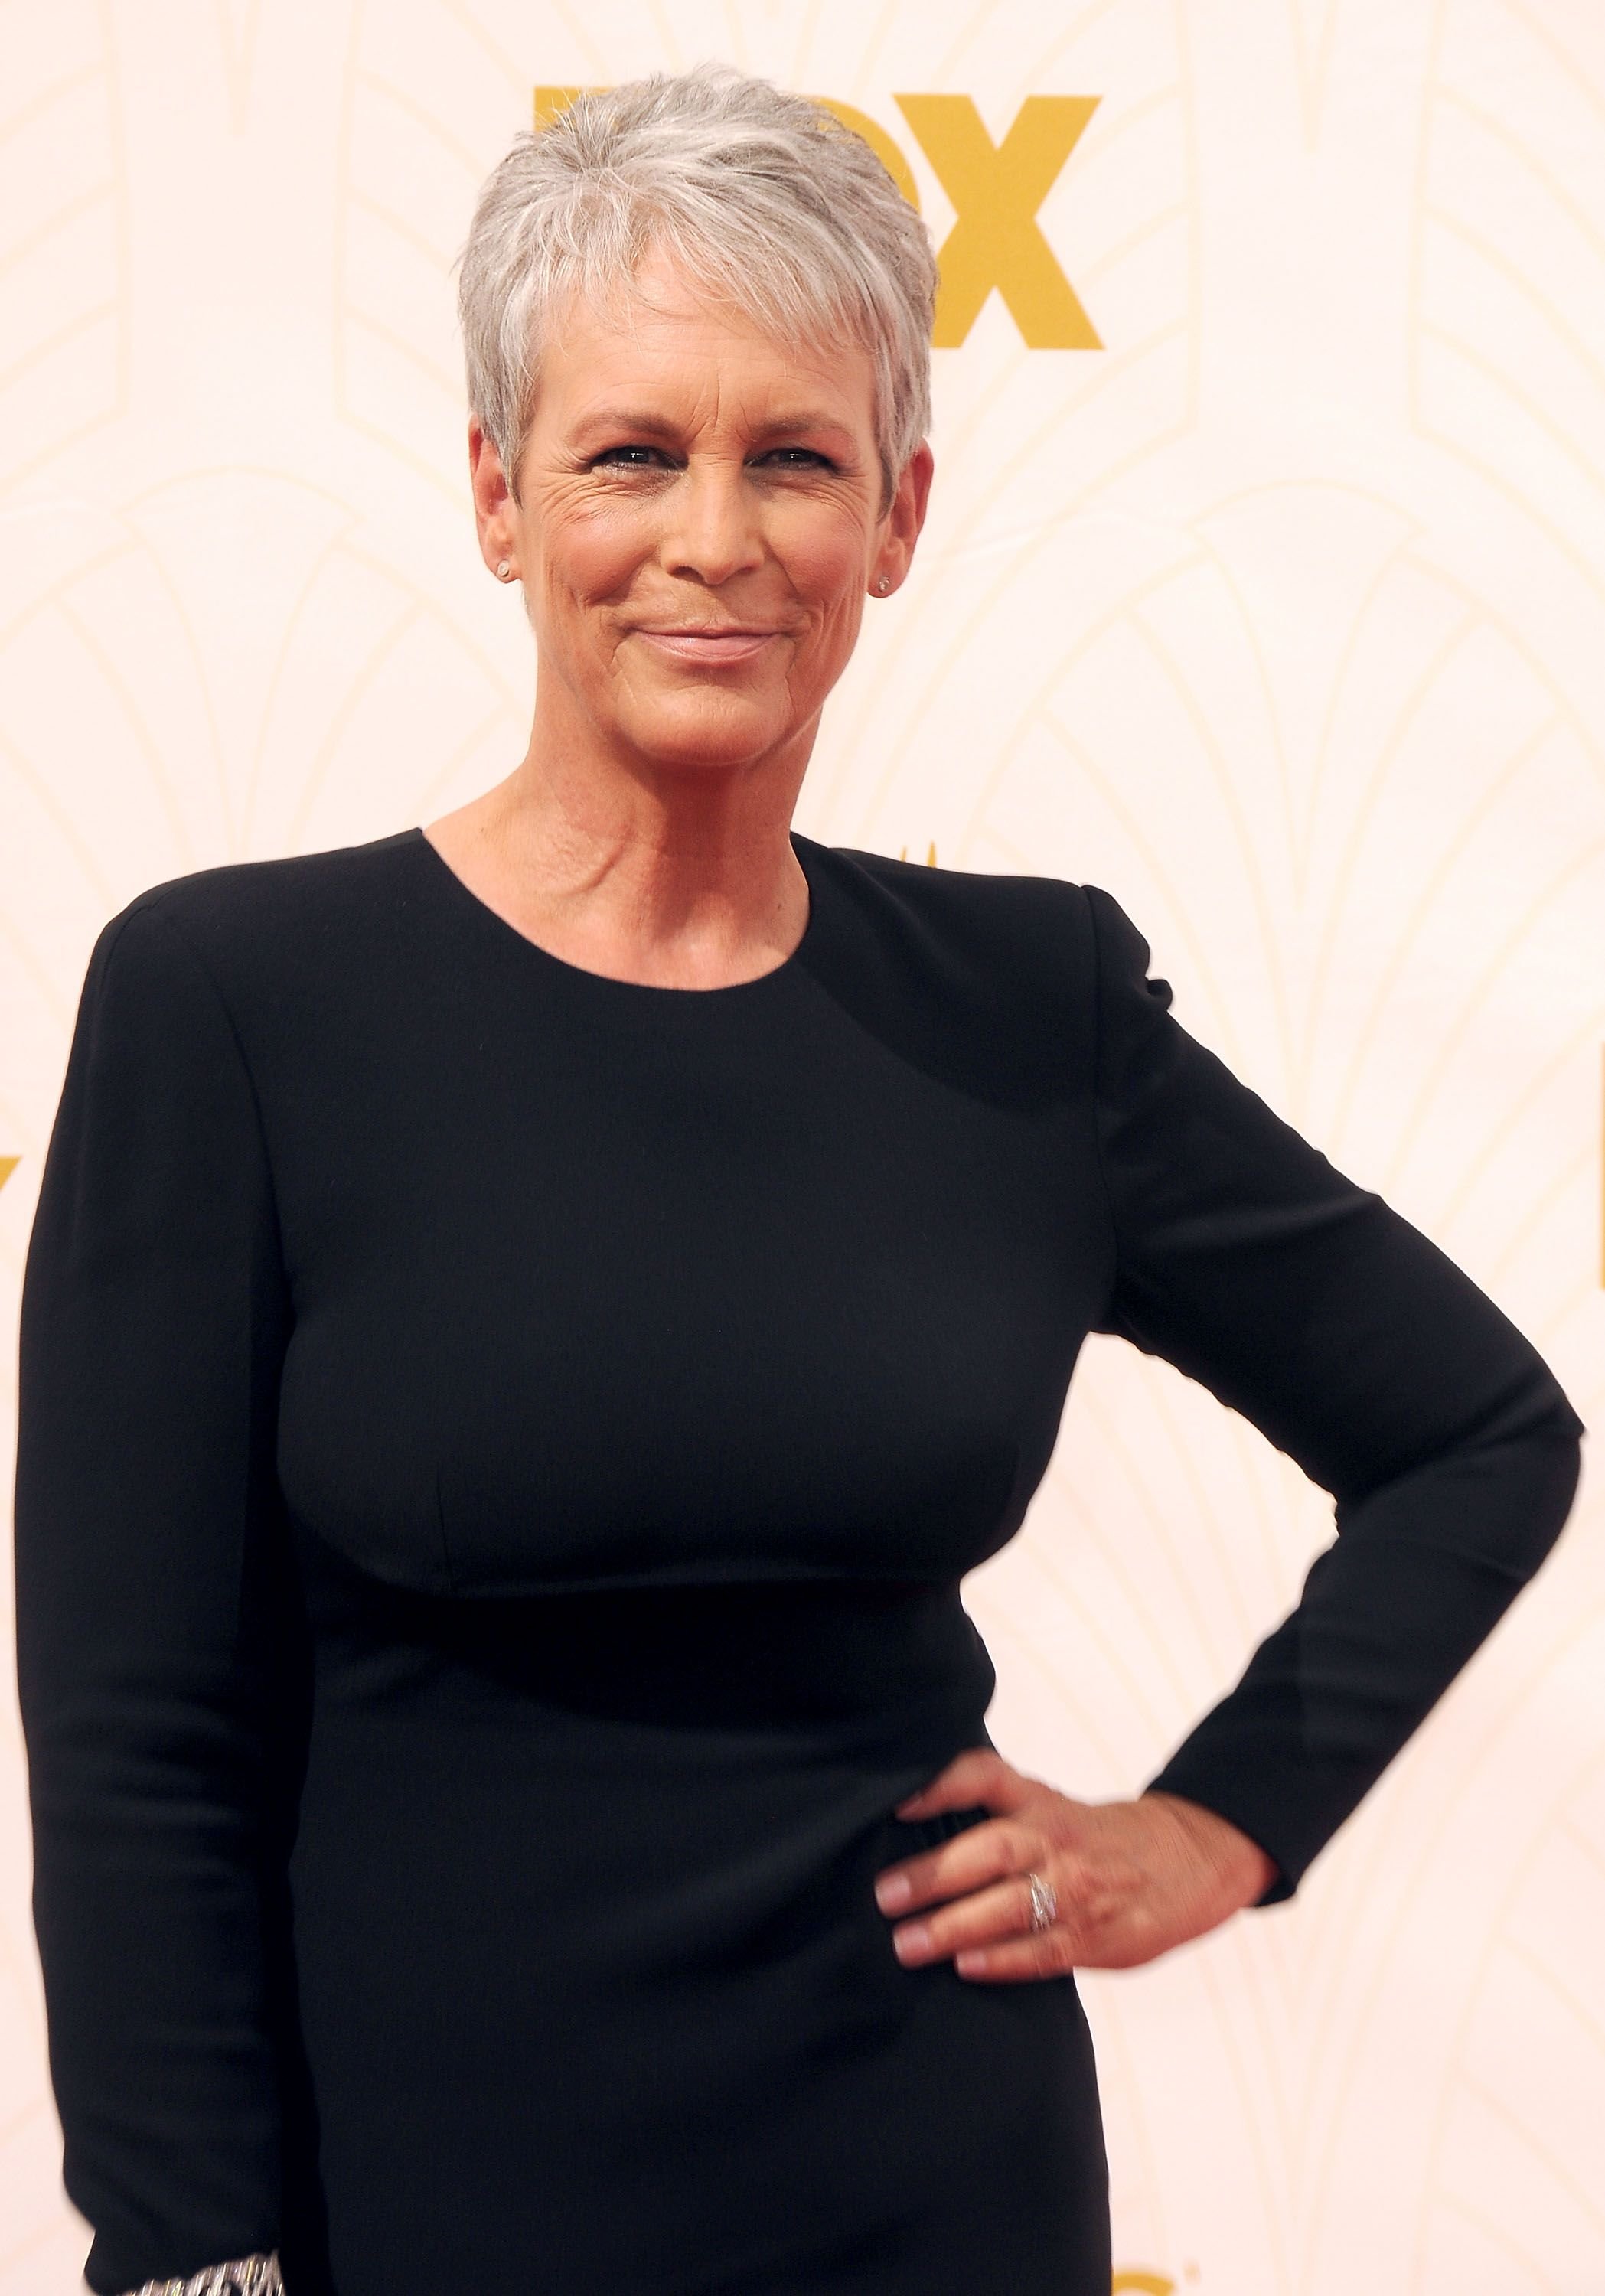 Jamie Lee Curtis during the 67th Annual Primetime Emmy Awards at the Microsoft Theater on September 20, 2015 in Los Angeles, California. | Source: Getty Images